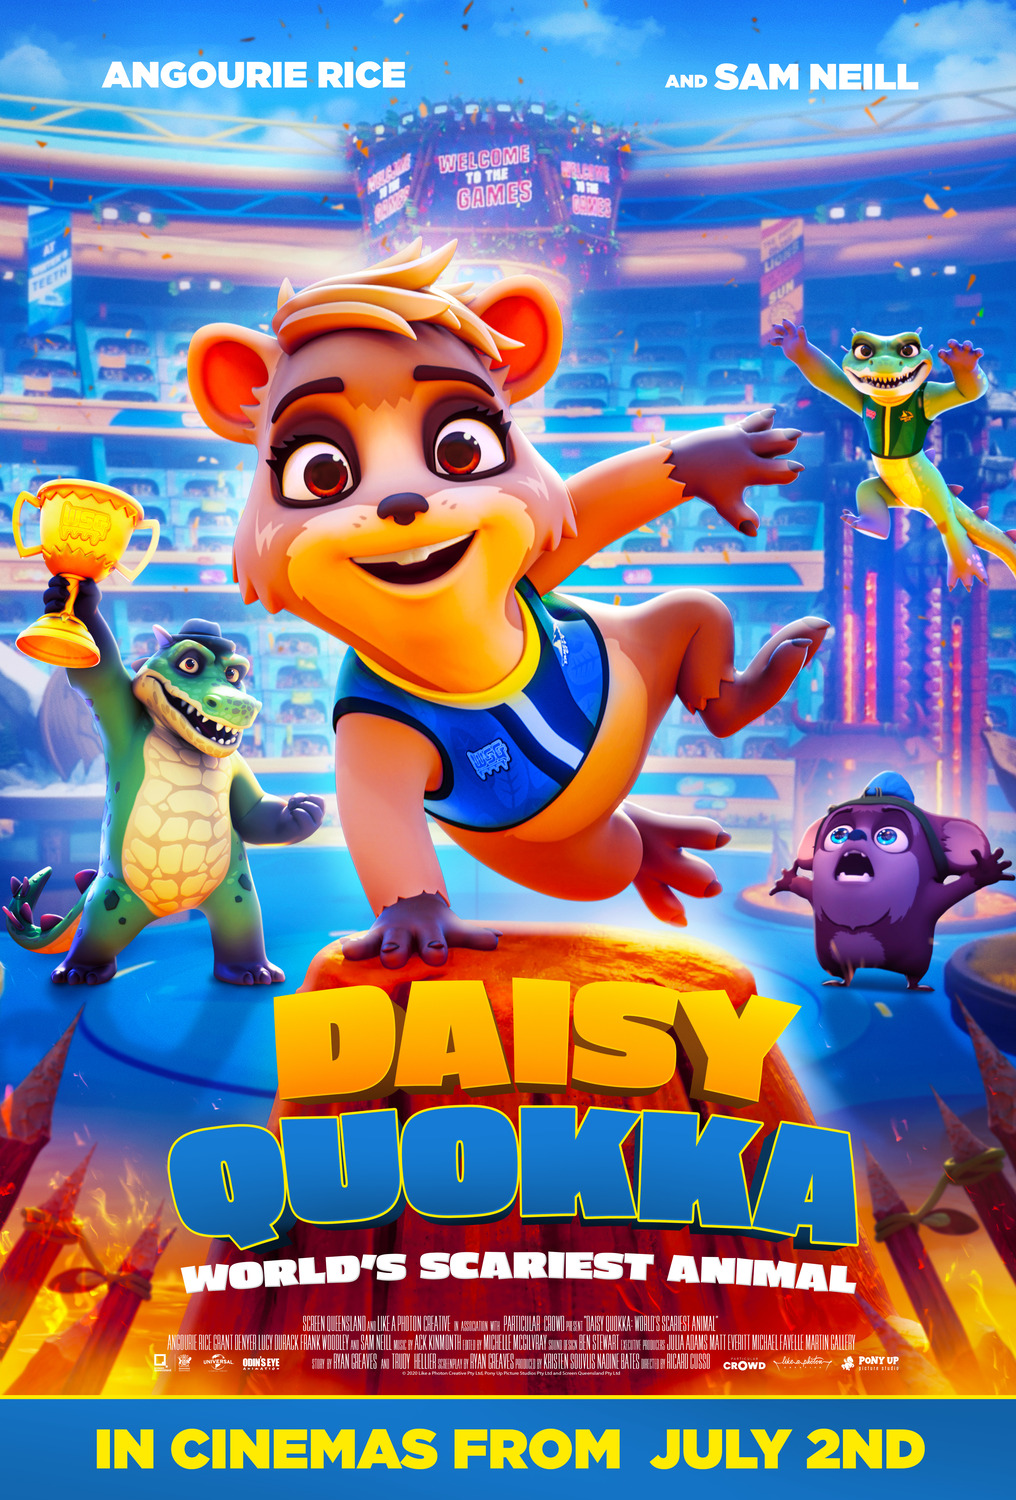 Extra Large Movie Poster Image for Daisy Quokka: World's Scariest Animal (#2 of 2)